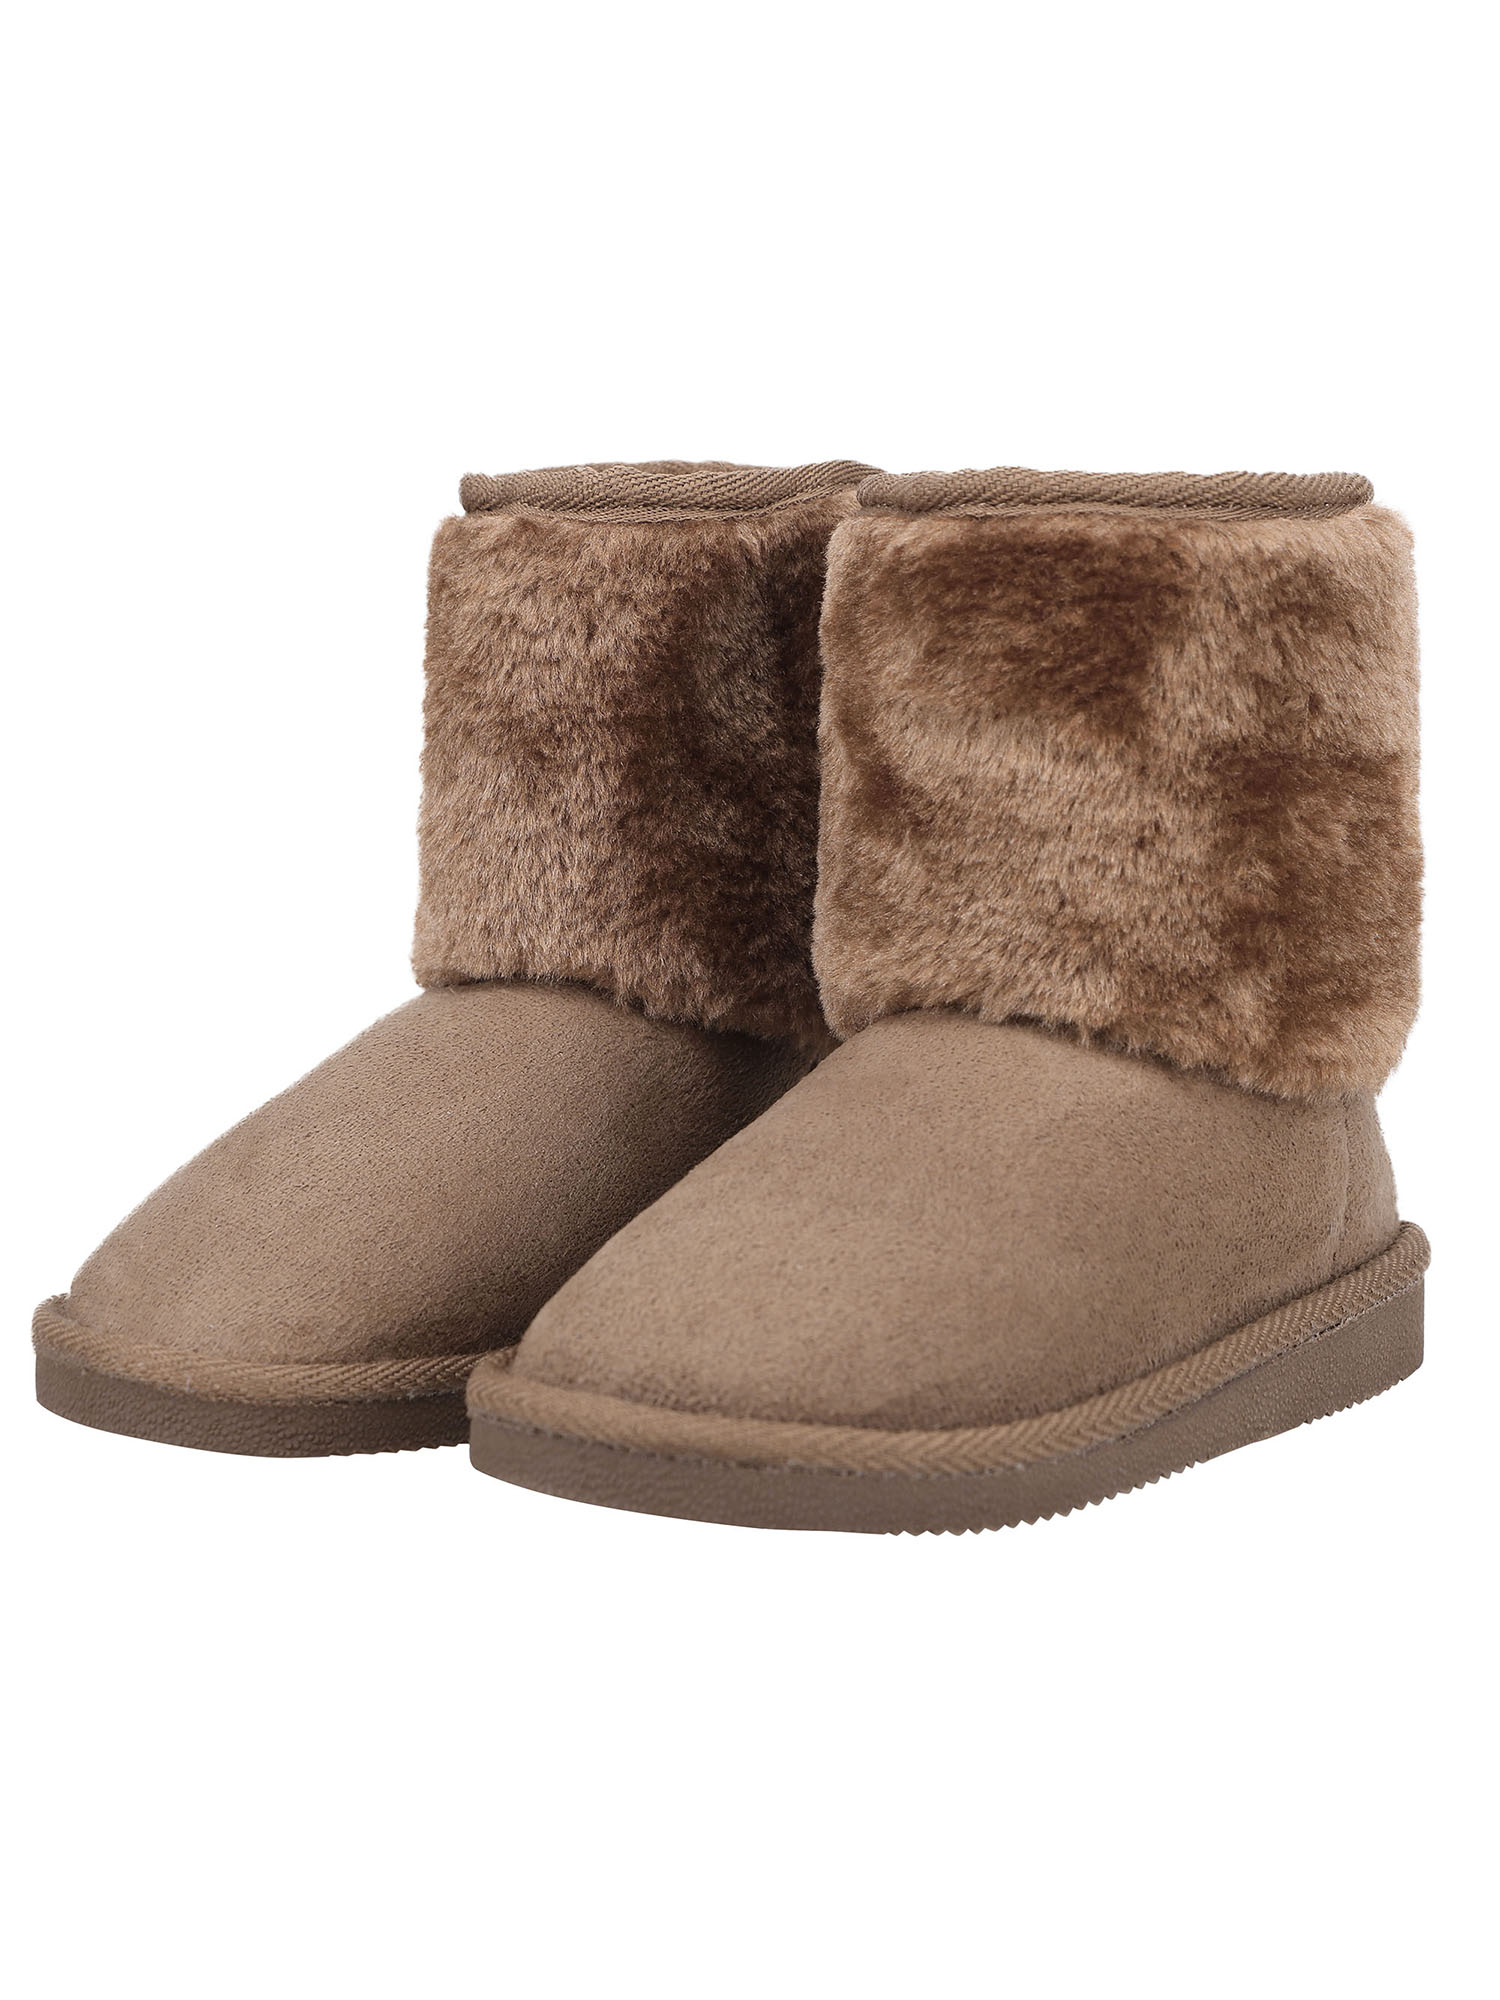 Compatible for Kids Snow Boots Sherpa Lined Winter Boots Camel 12 - image 2 of 3